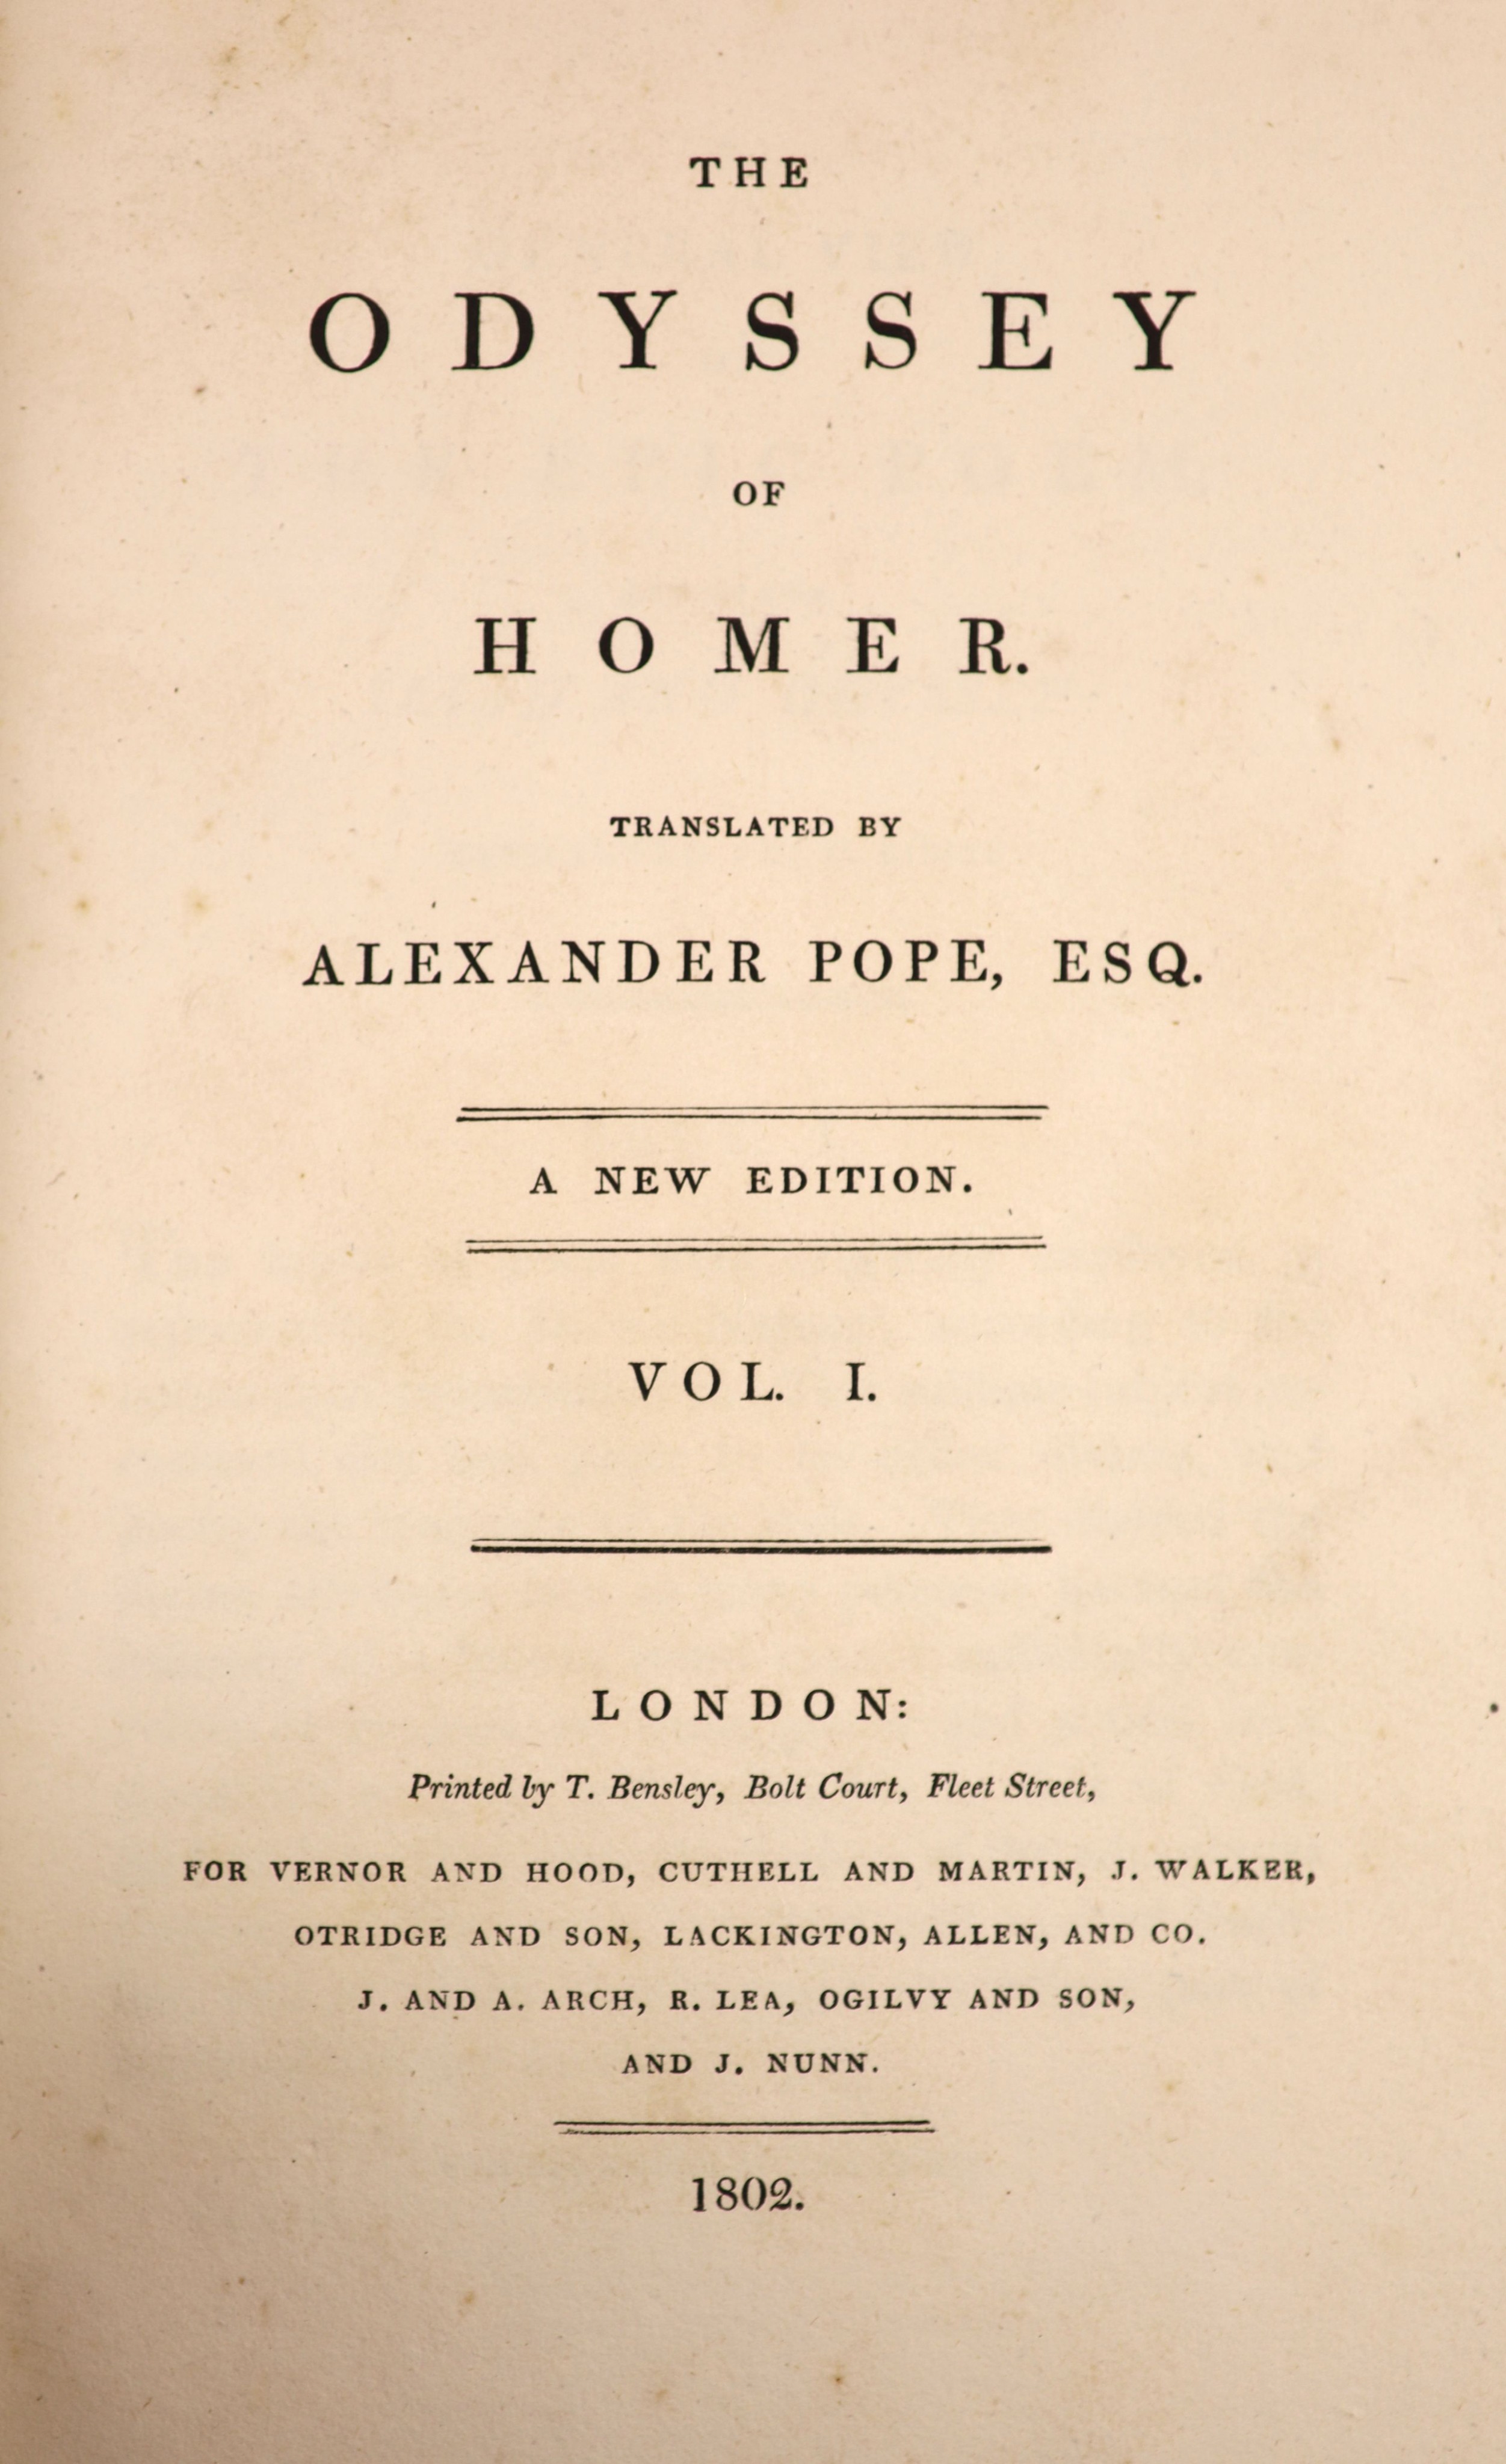 Pope, Alexander - The Odyssey of Homer. Translated by Alexander Pope, Esq. new edition, 2 vols, 3 engraved plates: old blind-decorated and gilt-ruled calf, gilt-decorated spines with green labels, roy.8vo. 1802